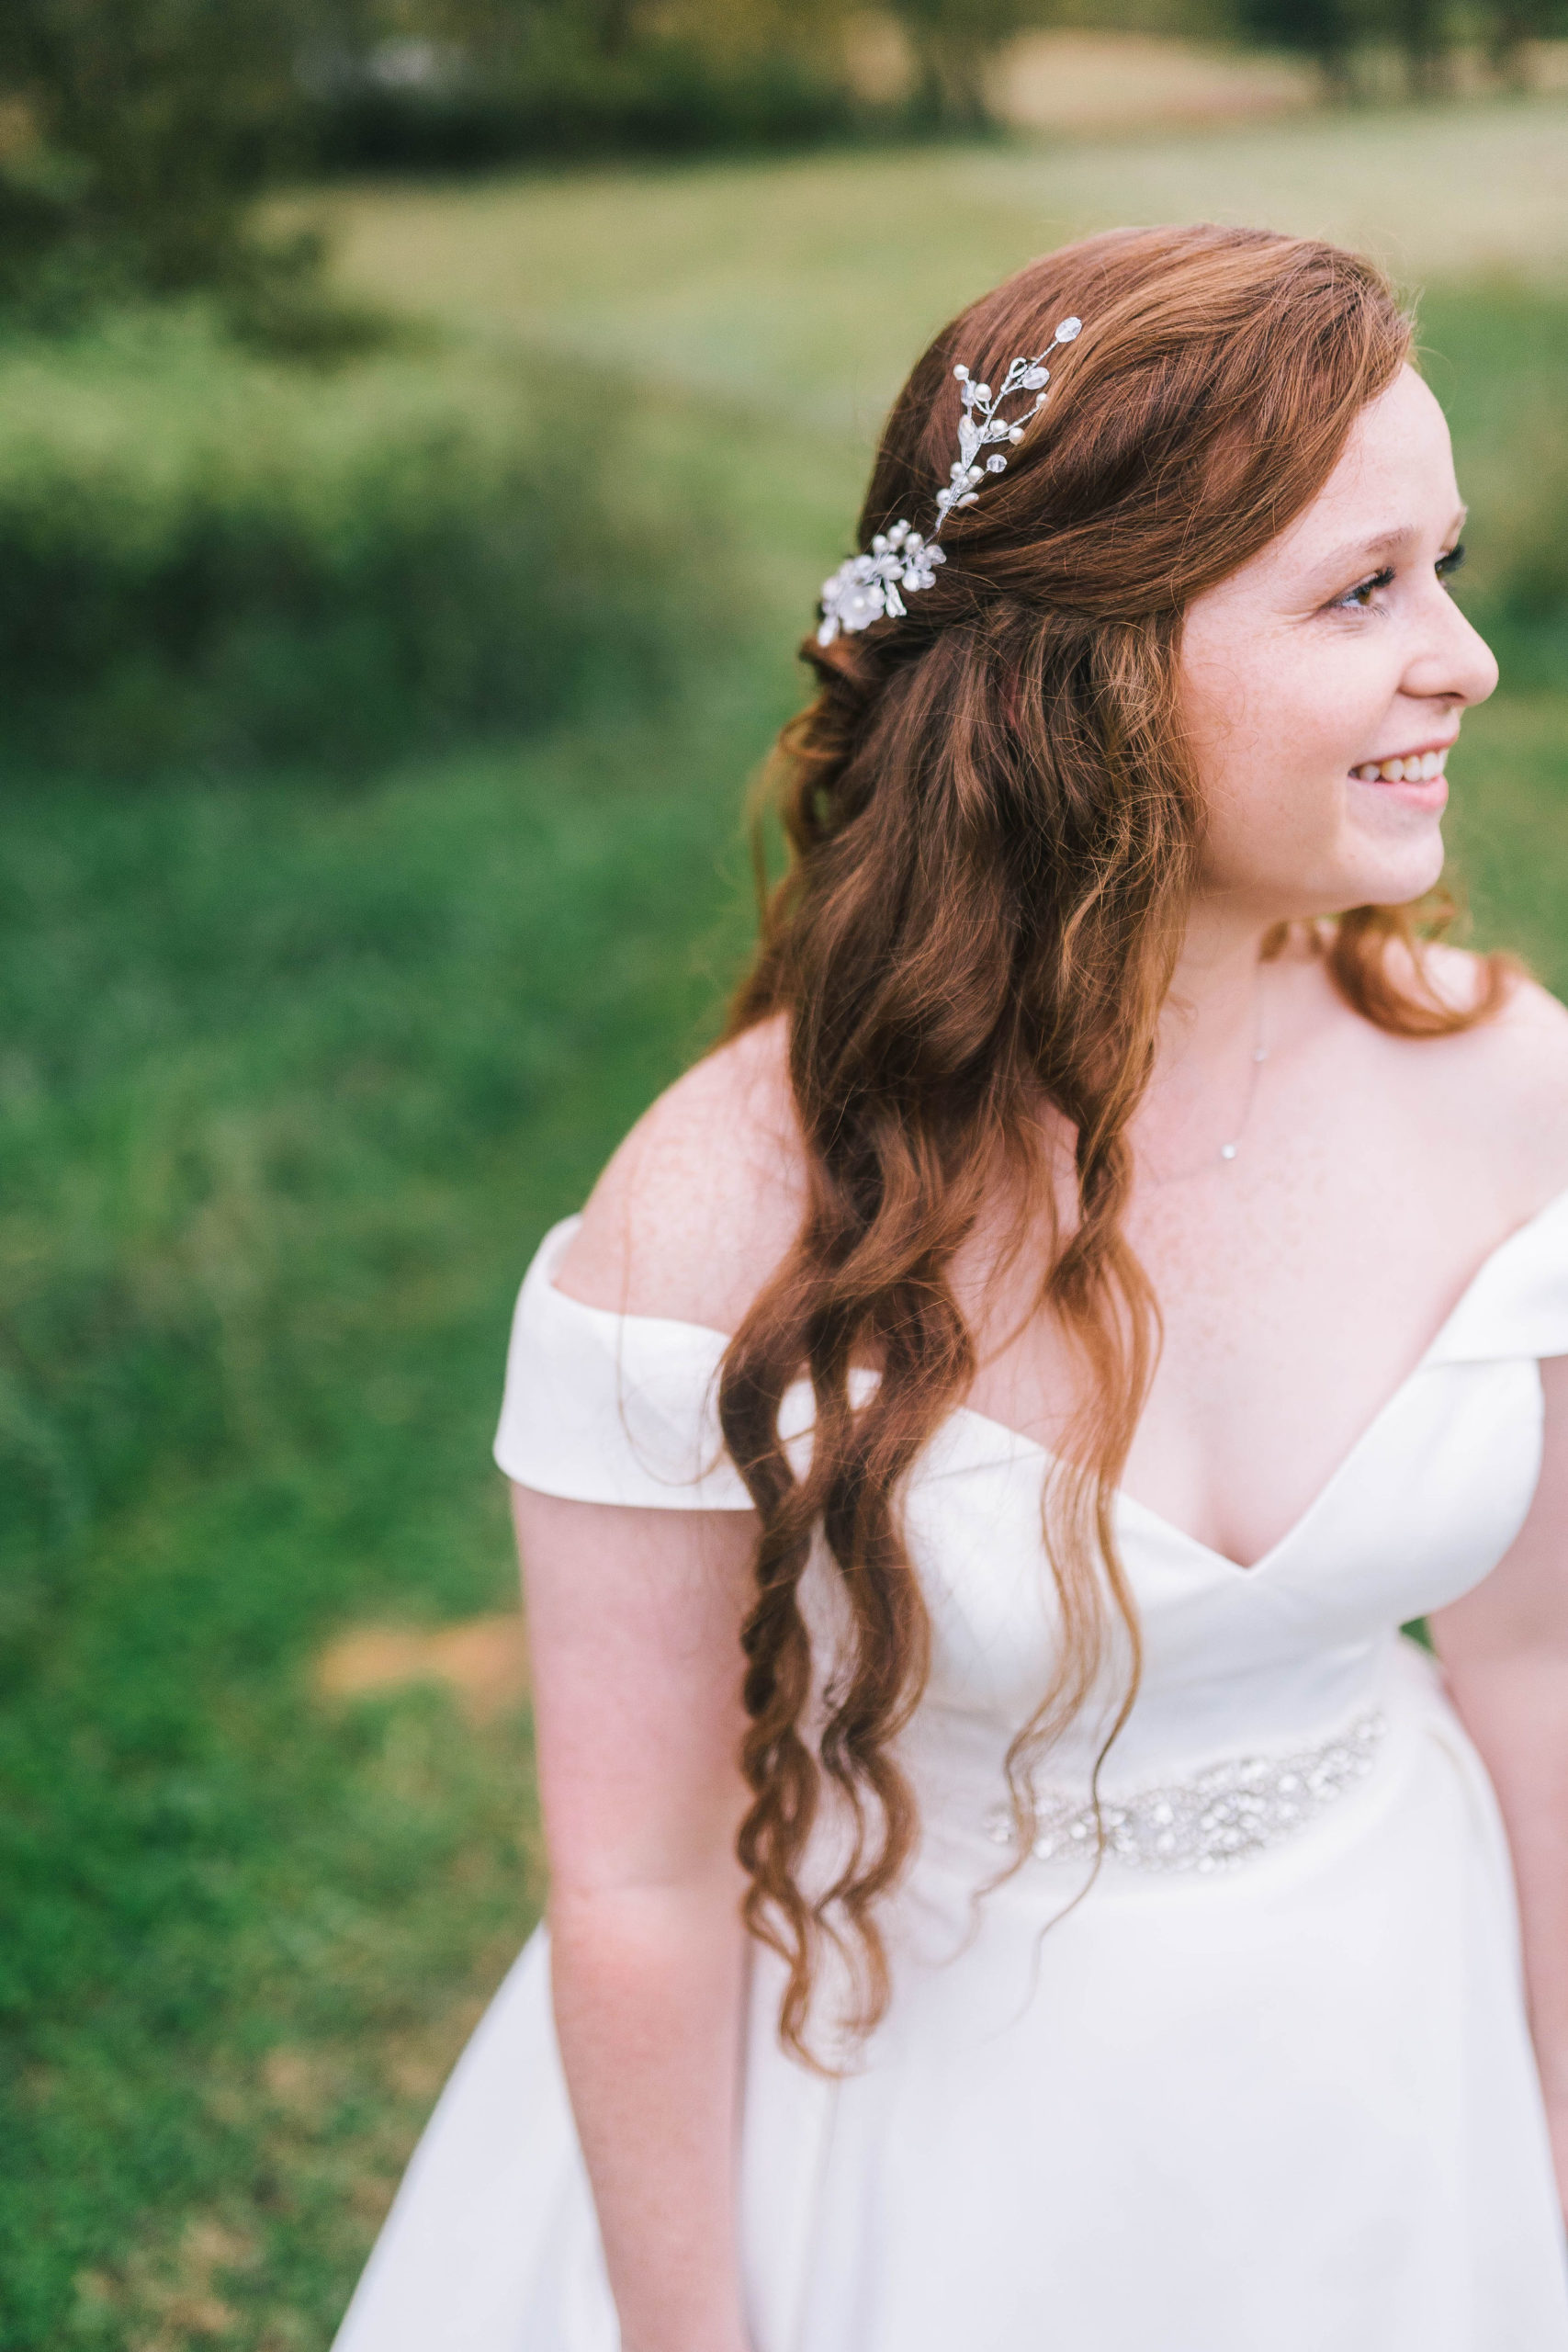 gorgeous shot of a red headed bride on her wedding day. Off the shoulder white satin gown with a beautiful crystal waist detail.